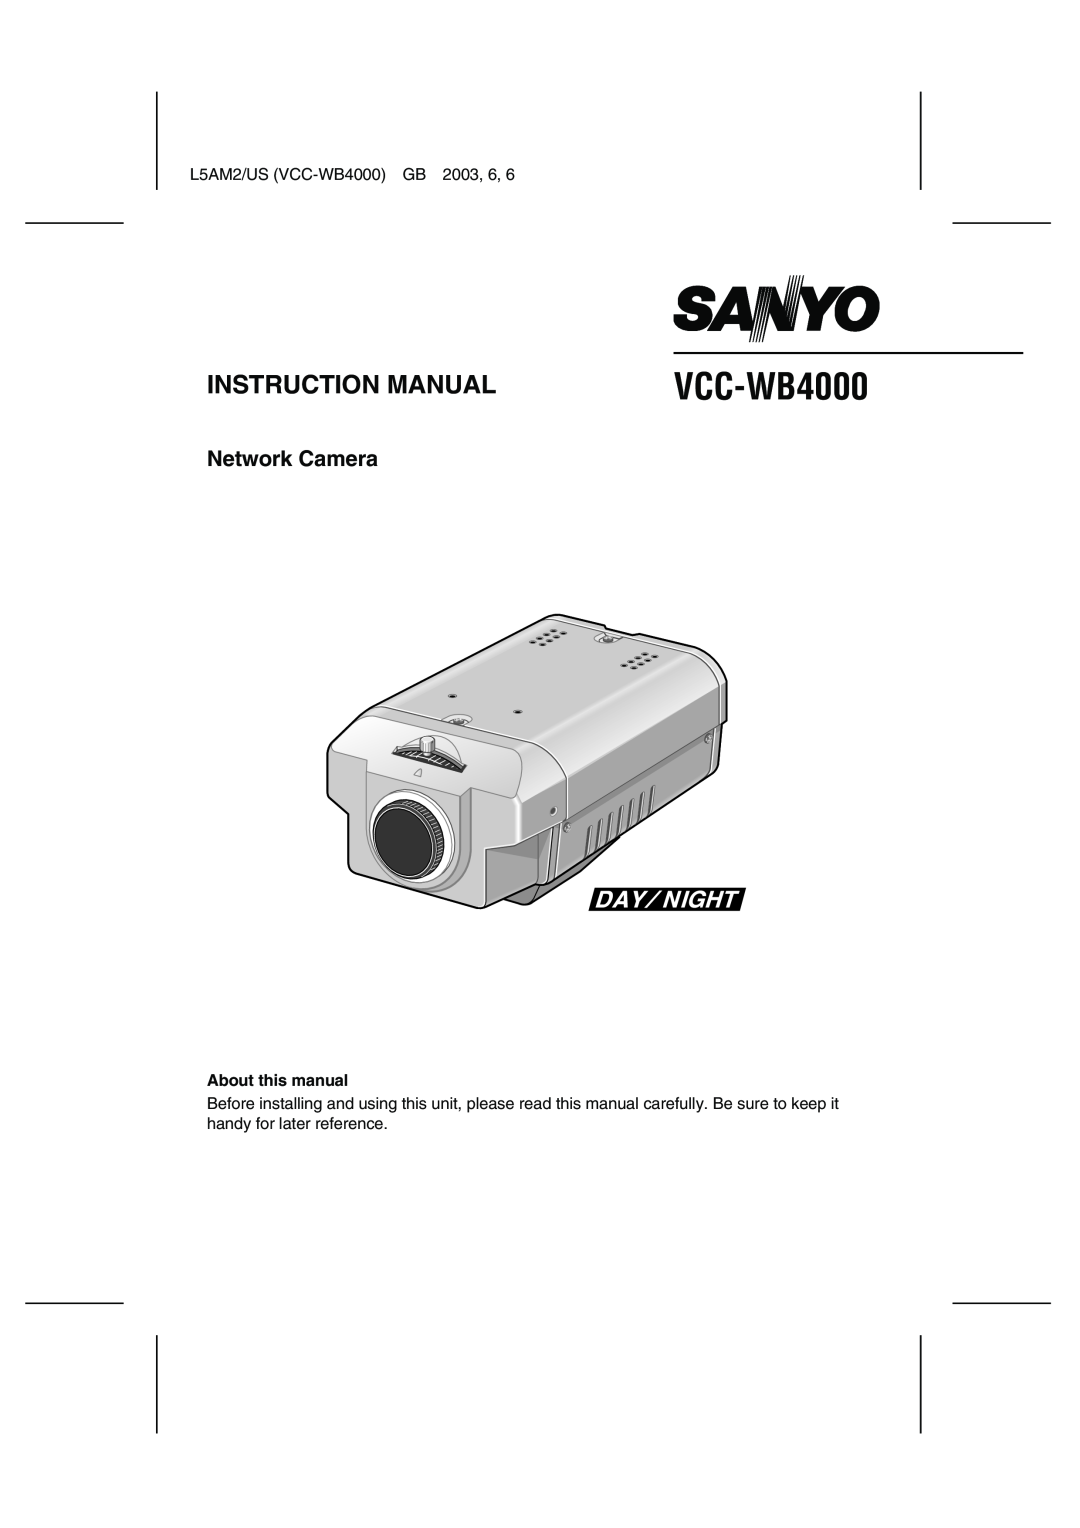 Sanyo instruction manual Network Camera, L5AM2/US VCC-WB4000 GB, About this manual 